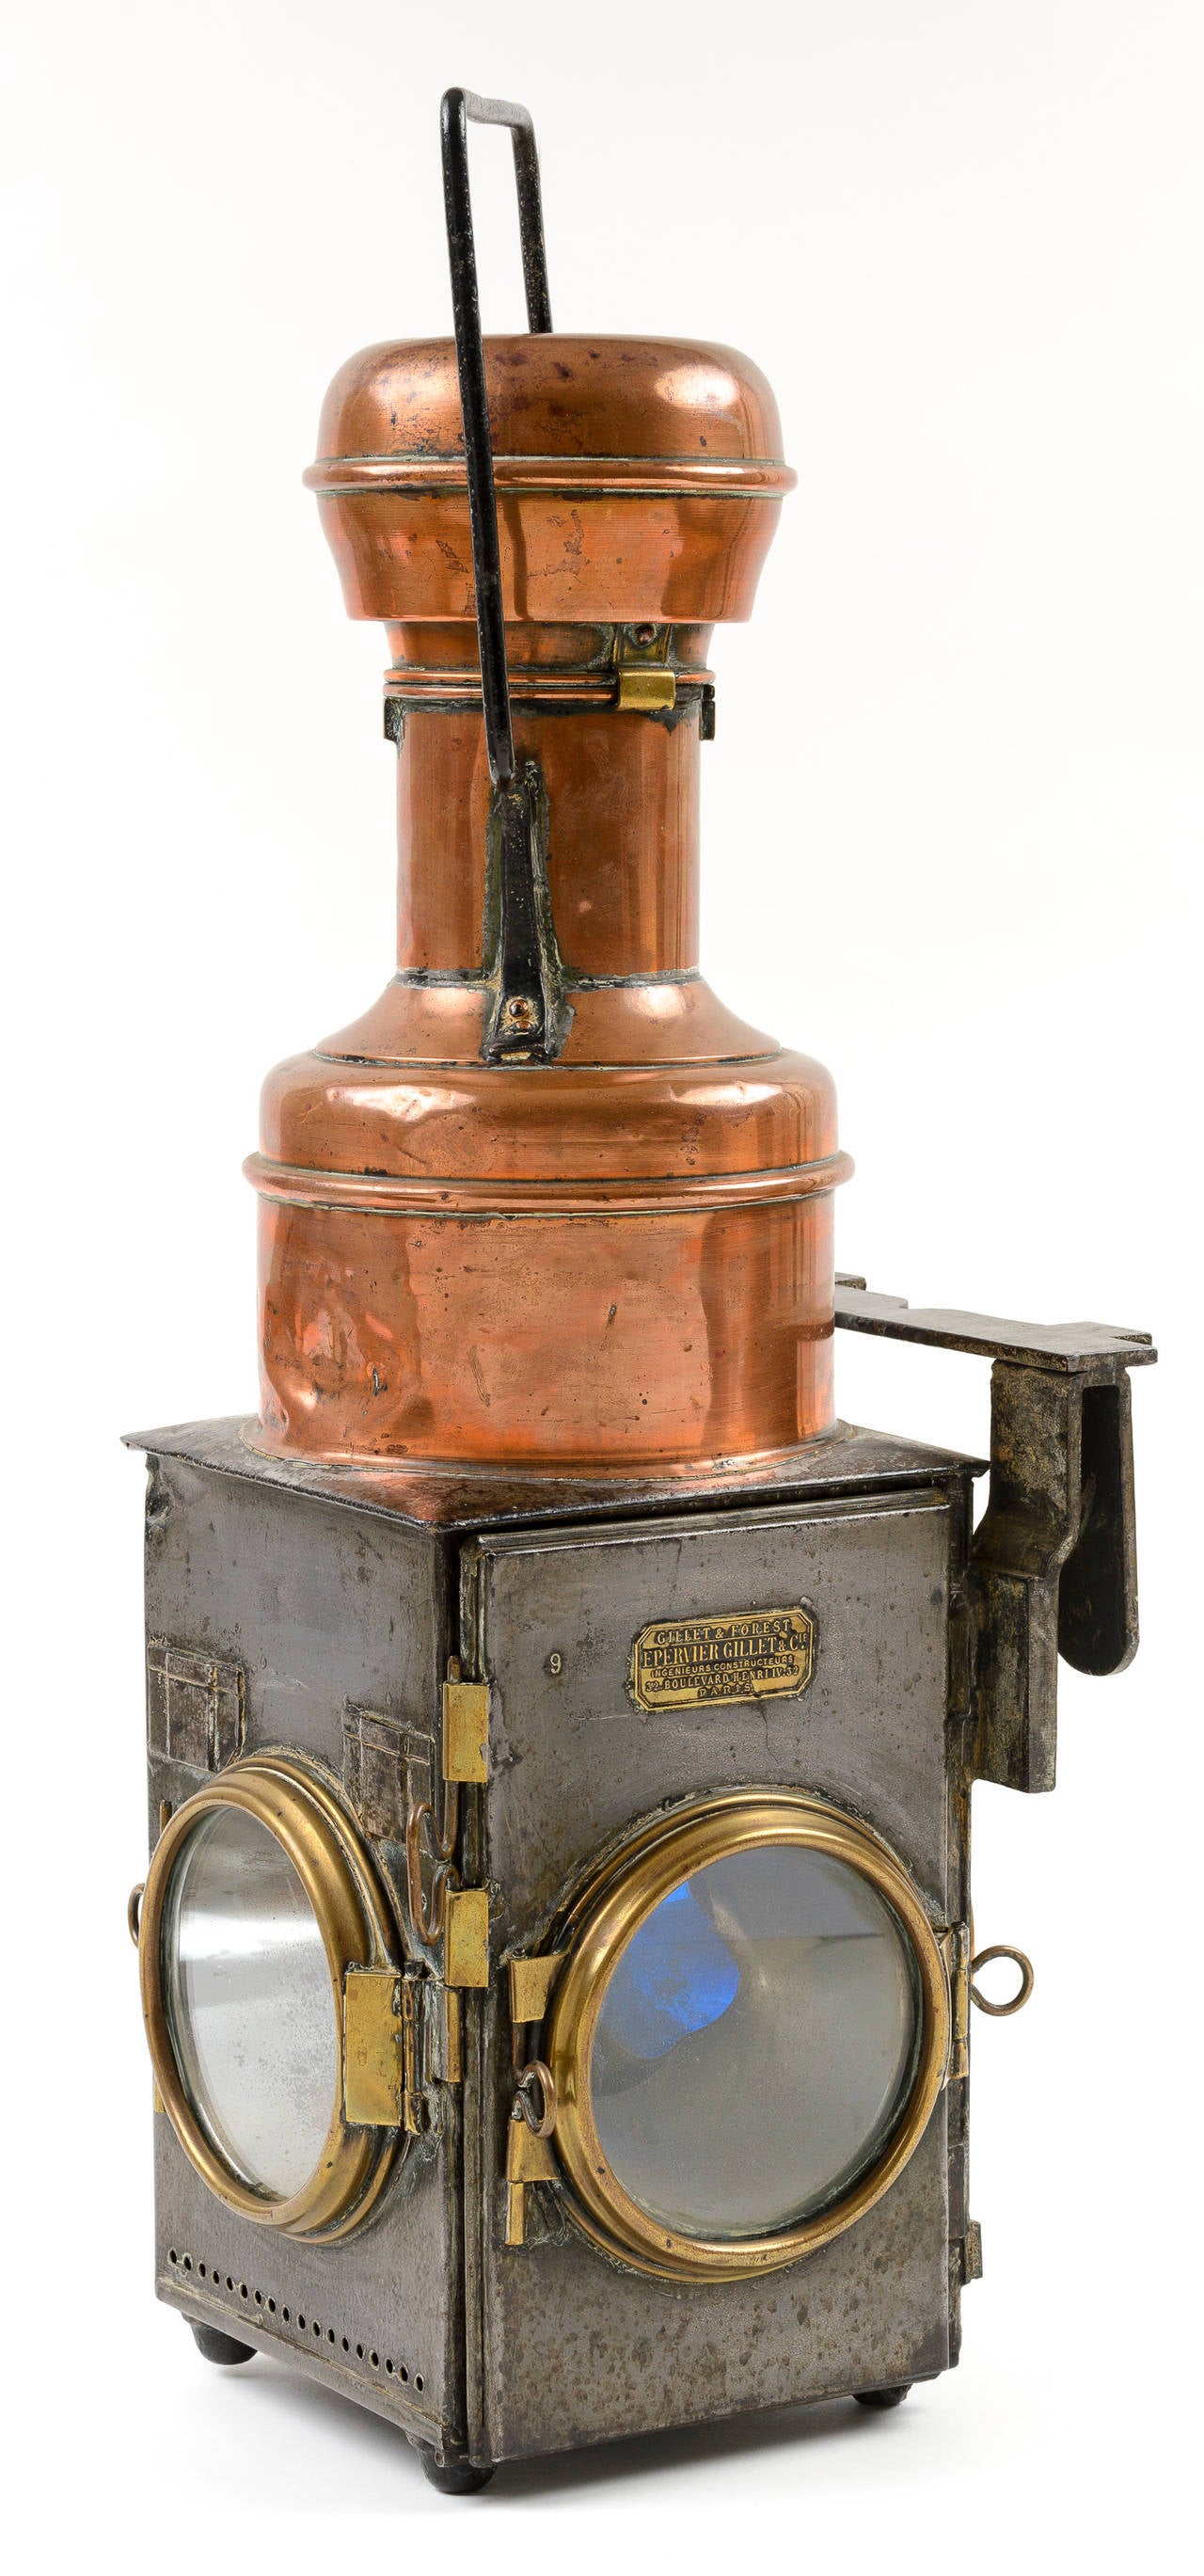 Handsome railroad lantern with tooled brass and copper detail. The piece has three round windows with brass fittings.  The tall copper chimney has a handle for carrying.  The chimney top is hinged.  It has a forged bracket for hanging.